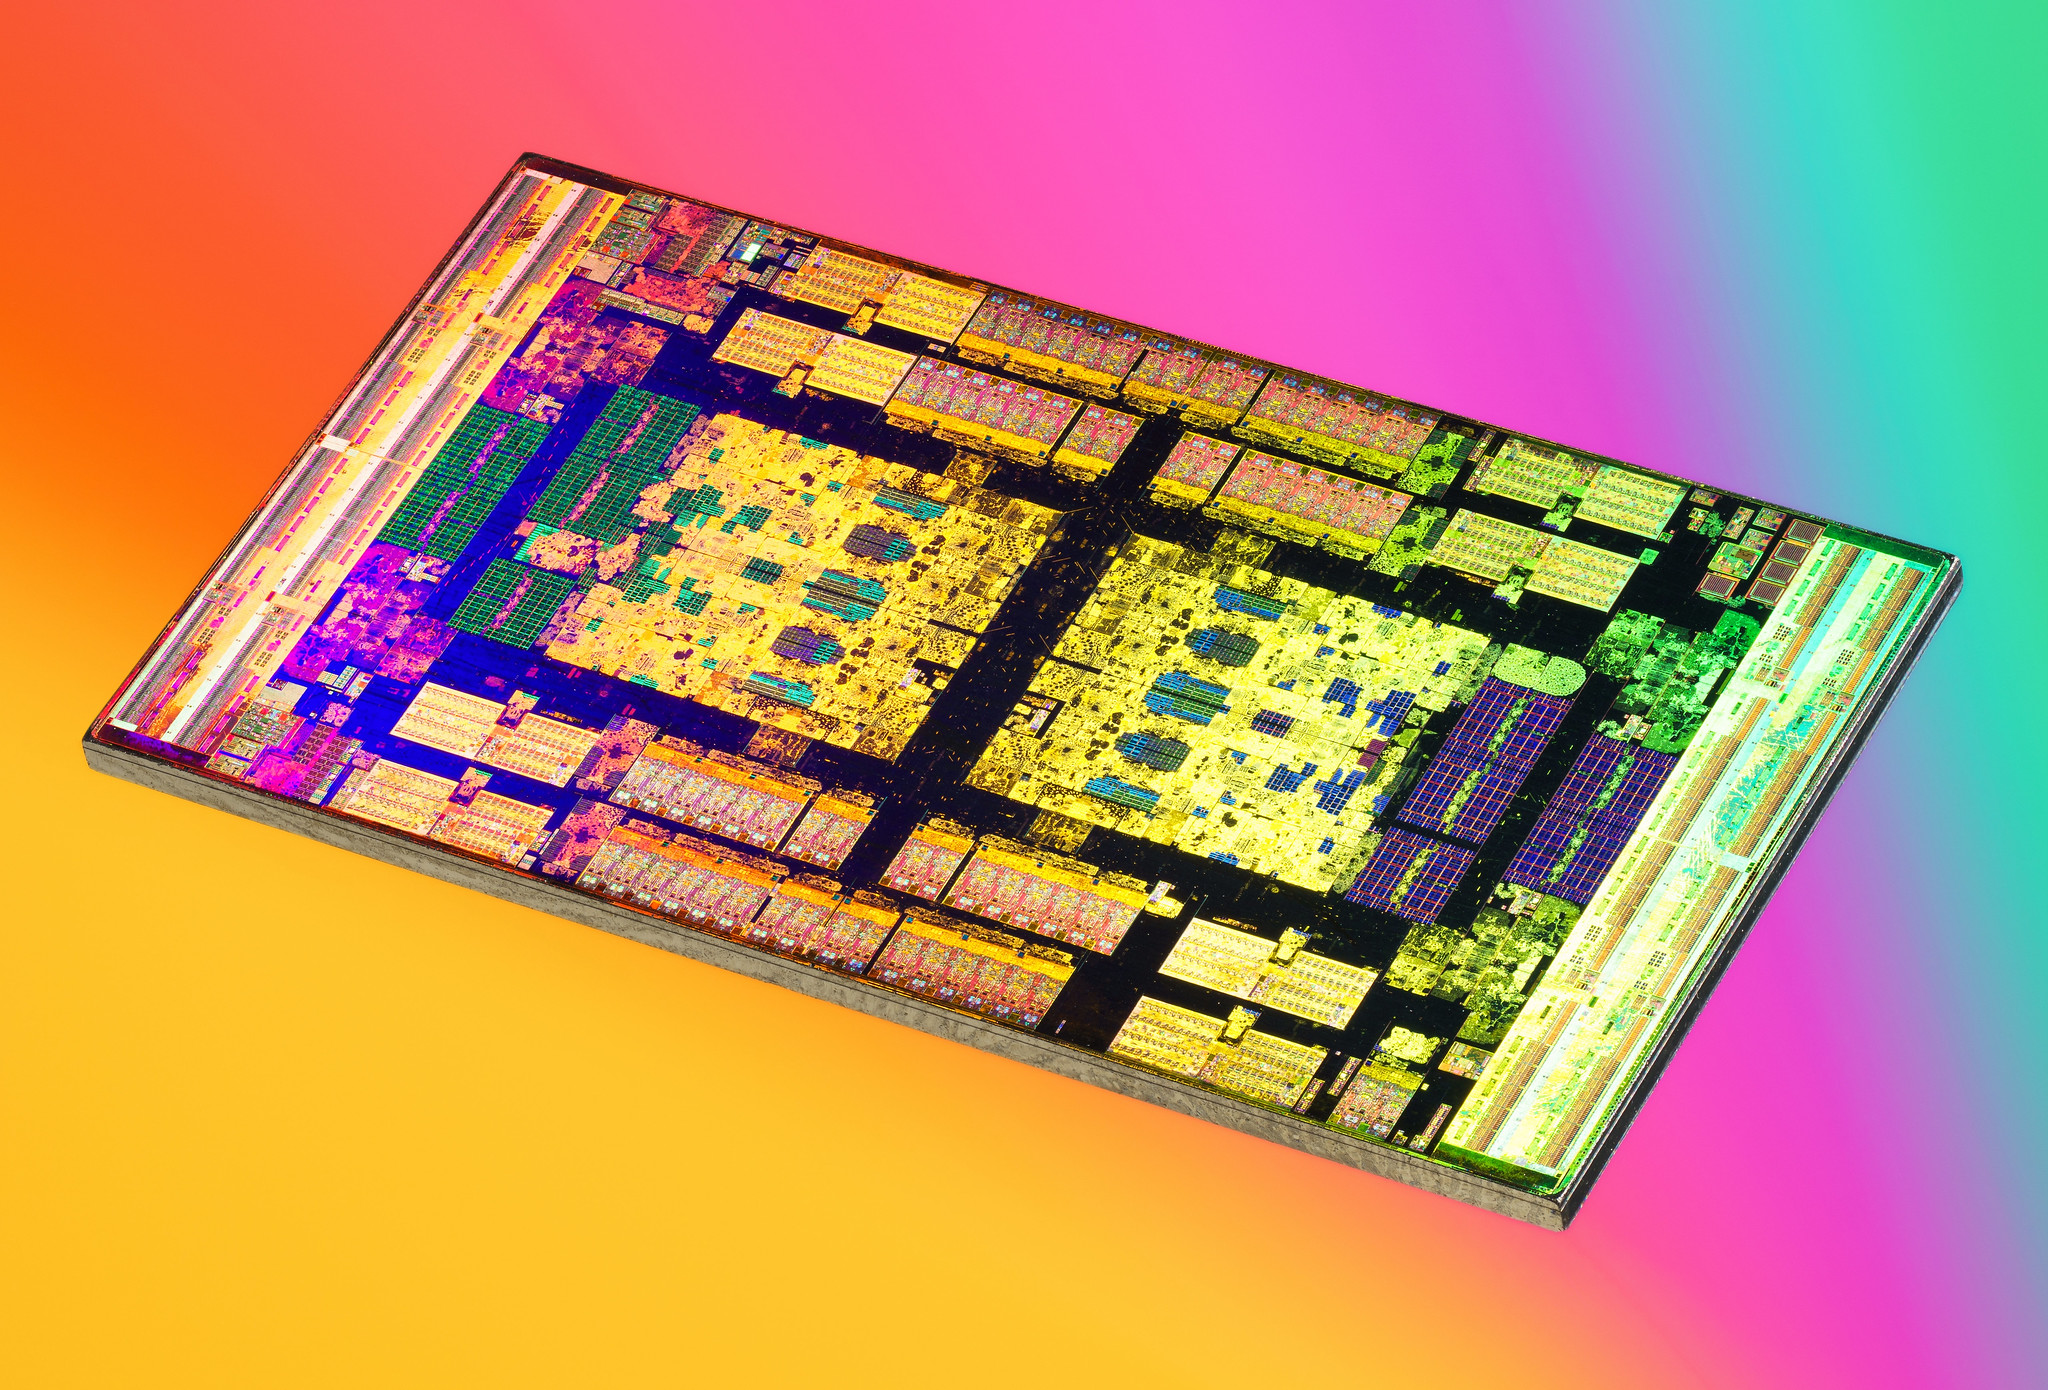 General 2048x1390 AMD CPU chips microchip technology closeup simple background colorful